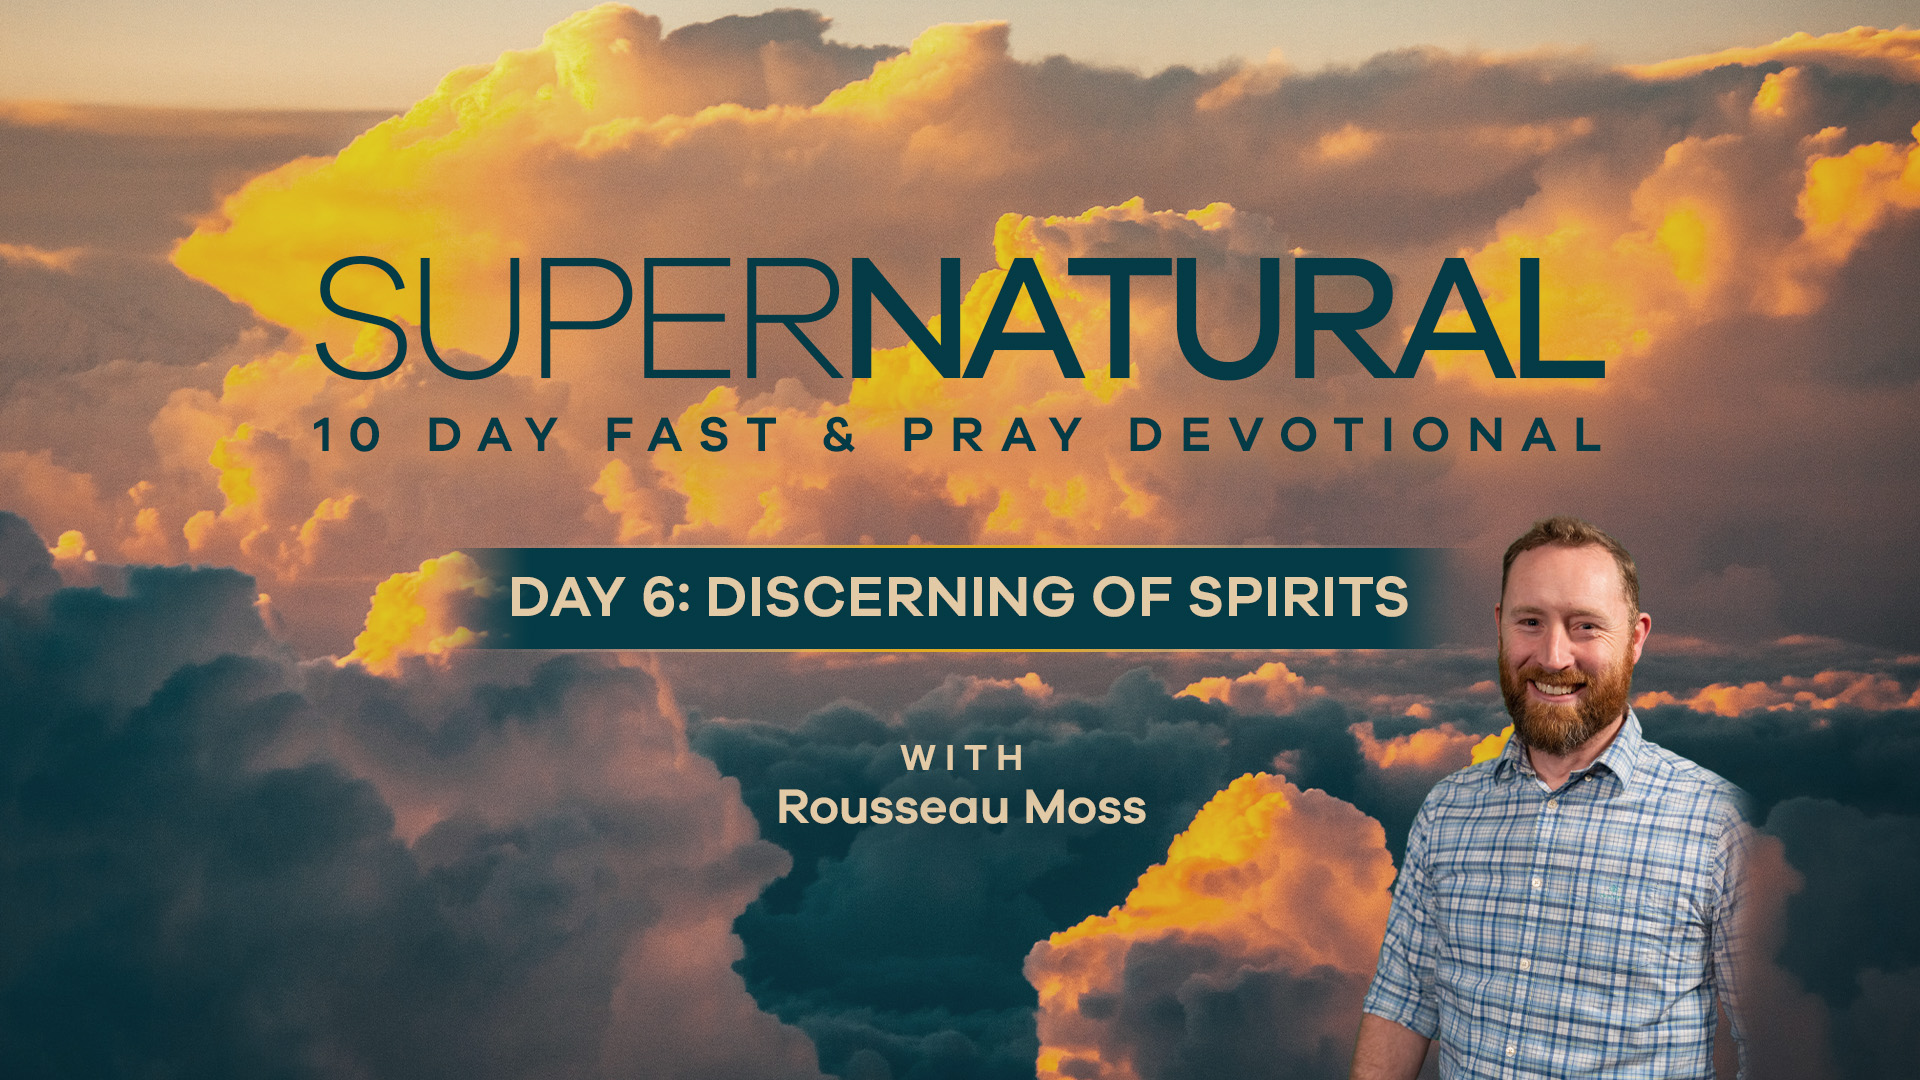 Video image for 'Day 6: Discerning of Spirits'' of the 10-Day Supernatural Devotional about discerning of spirits.